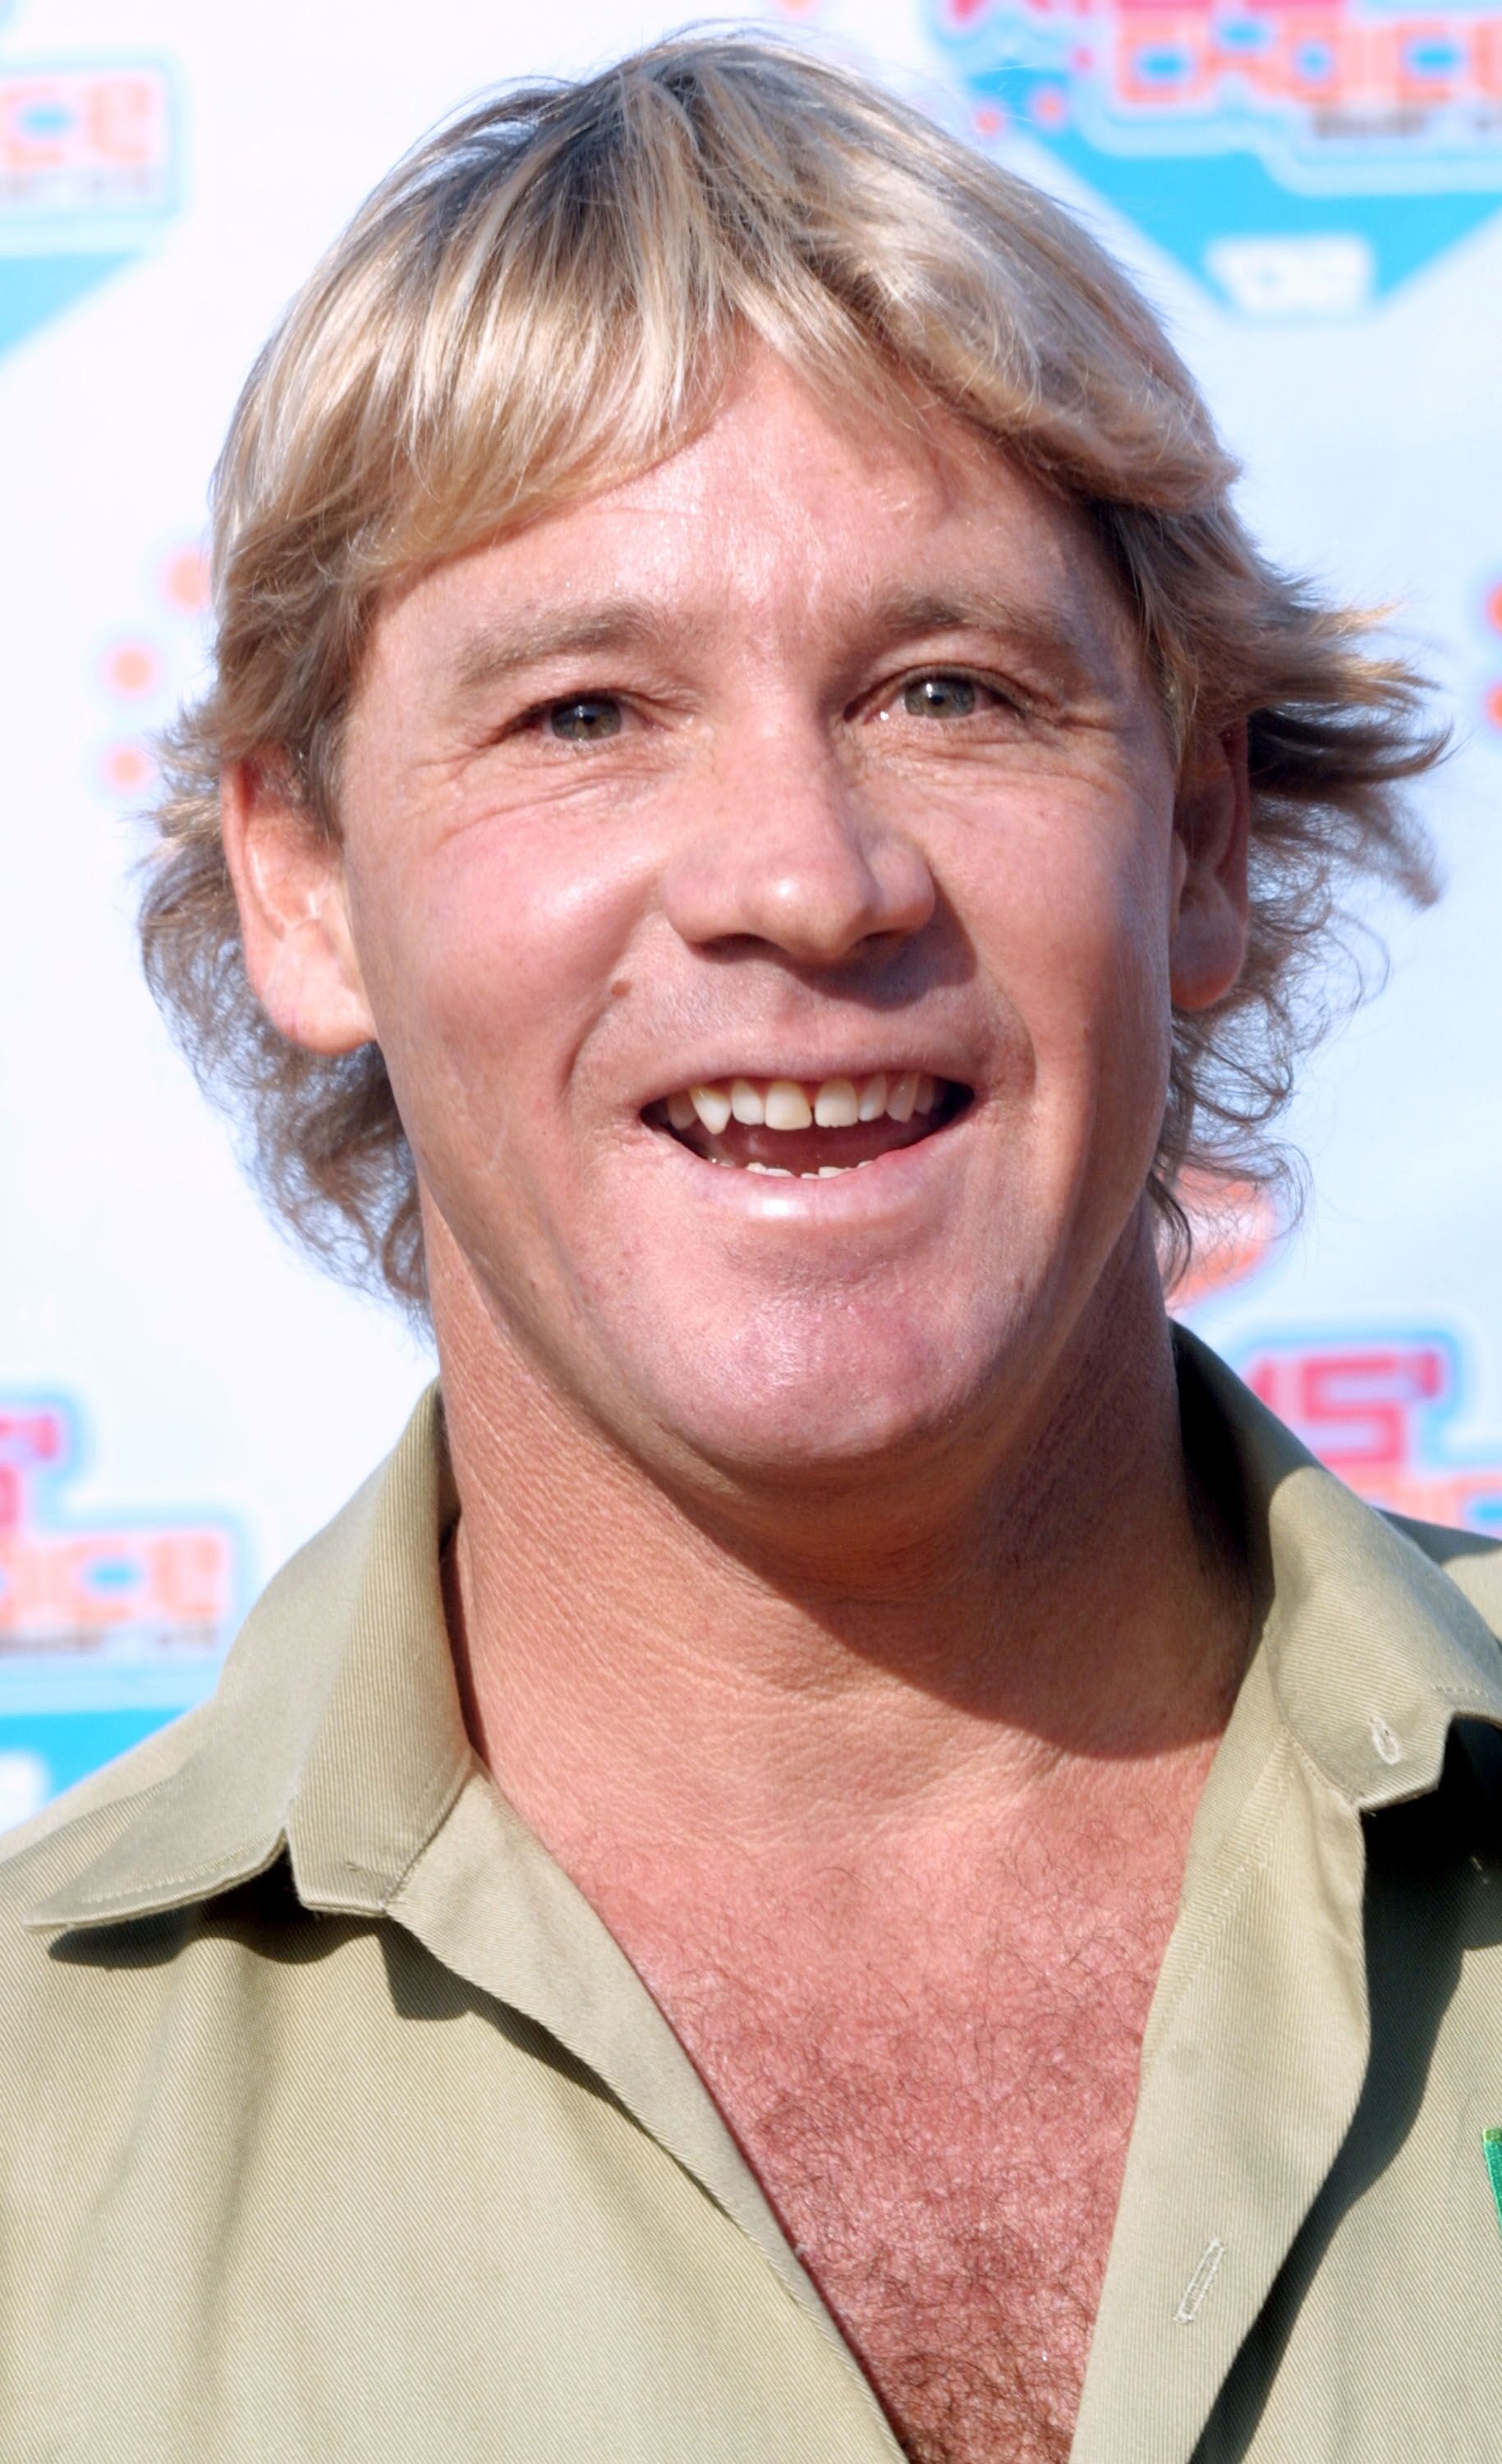  Steve Irwin "Crock Man" attends the Nickelodeon's 15th Annual Kids'' Choice Awards April 20, 2002 in Santa Monica, CA. Kids cast more than 17 million votes for their favorites in 20 catagories | Photo: Getty Images 